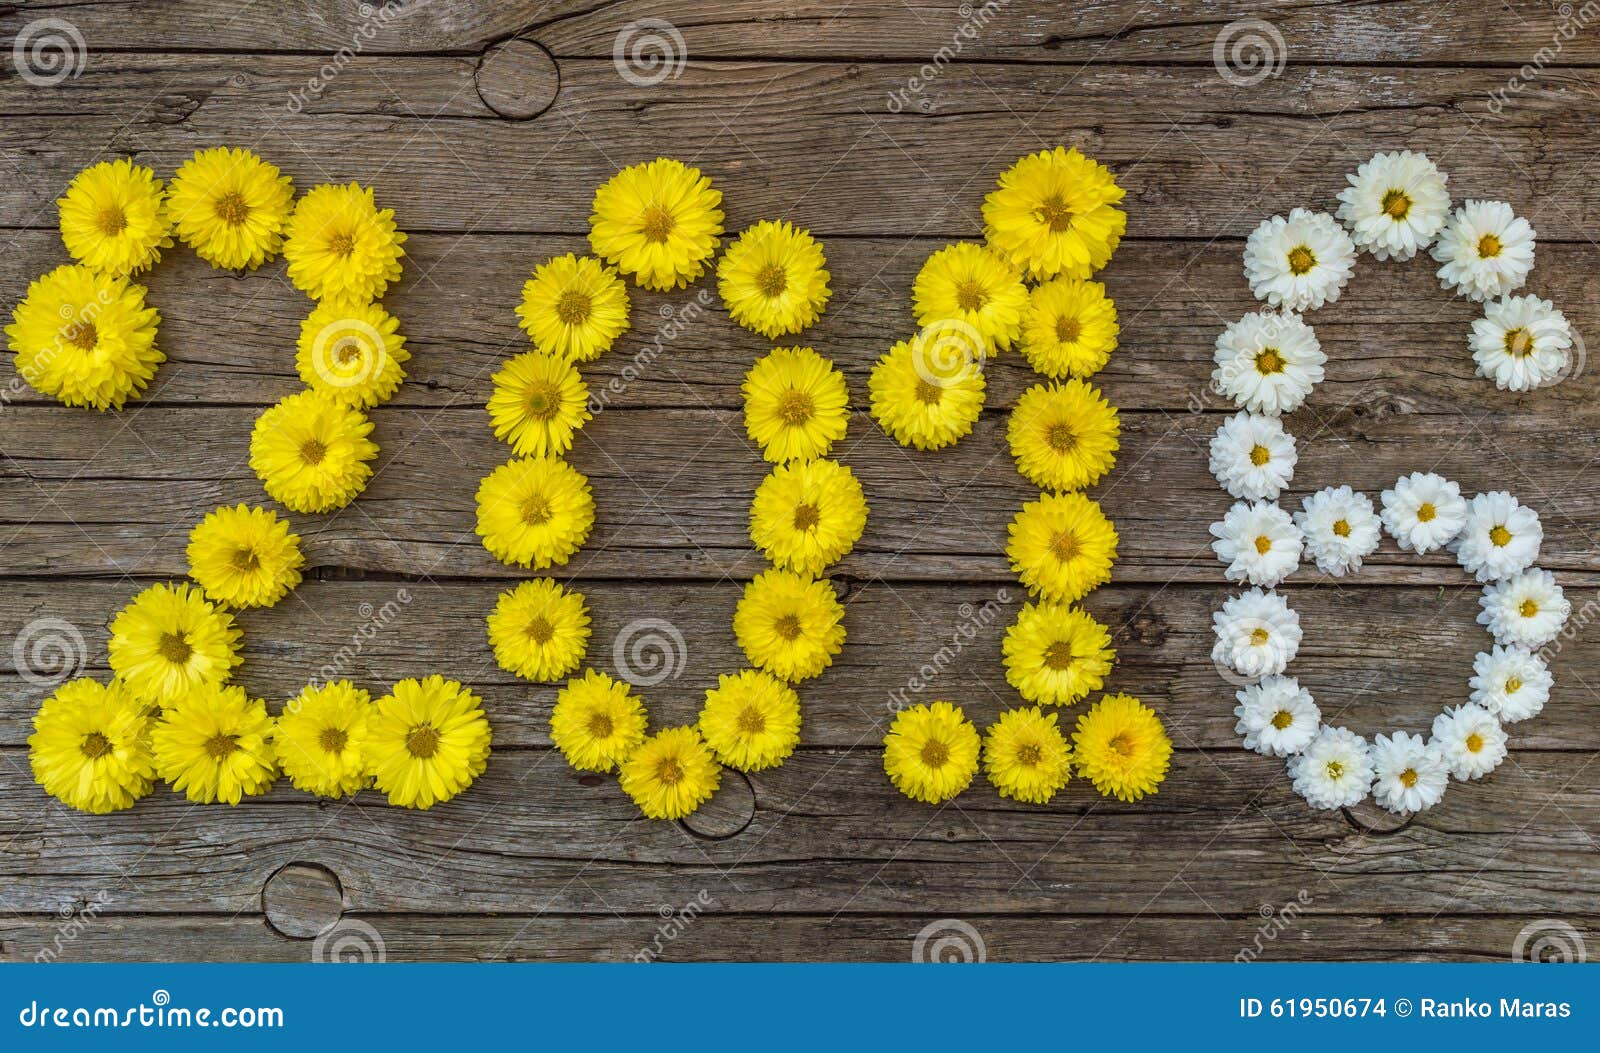 11,062 Happy New Year Flowers Stock Photos - Free & Royalty-Free ...